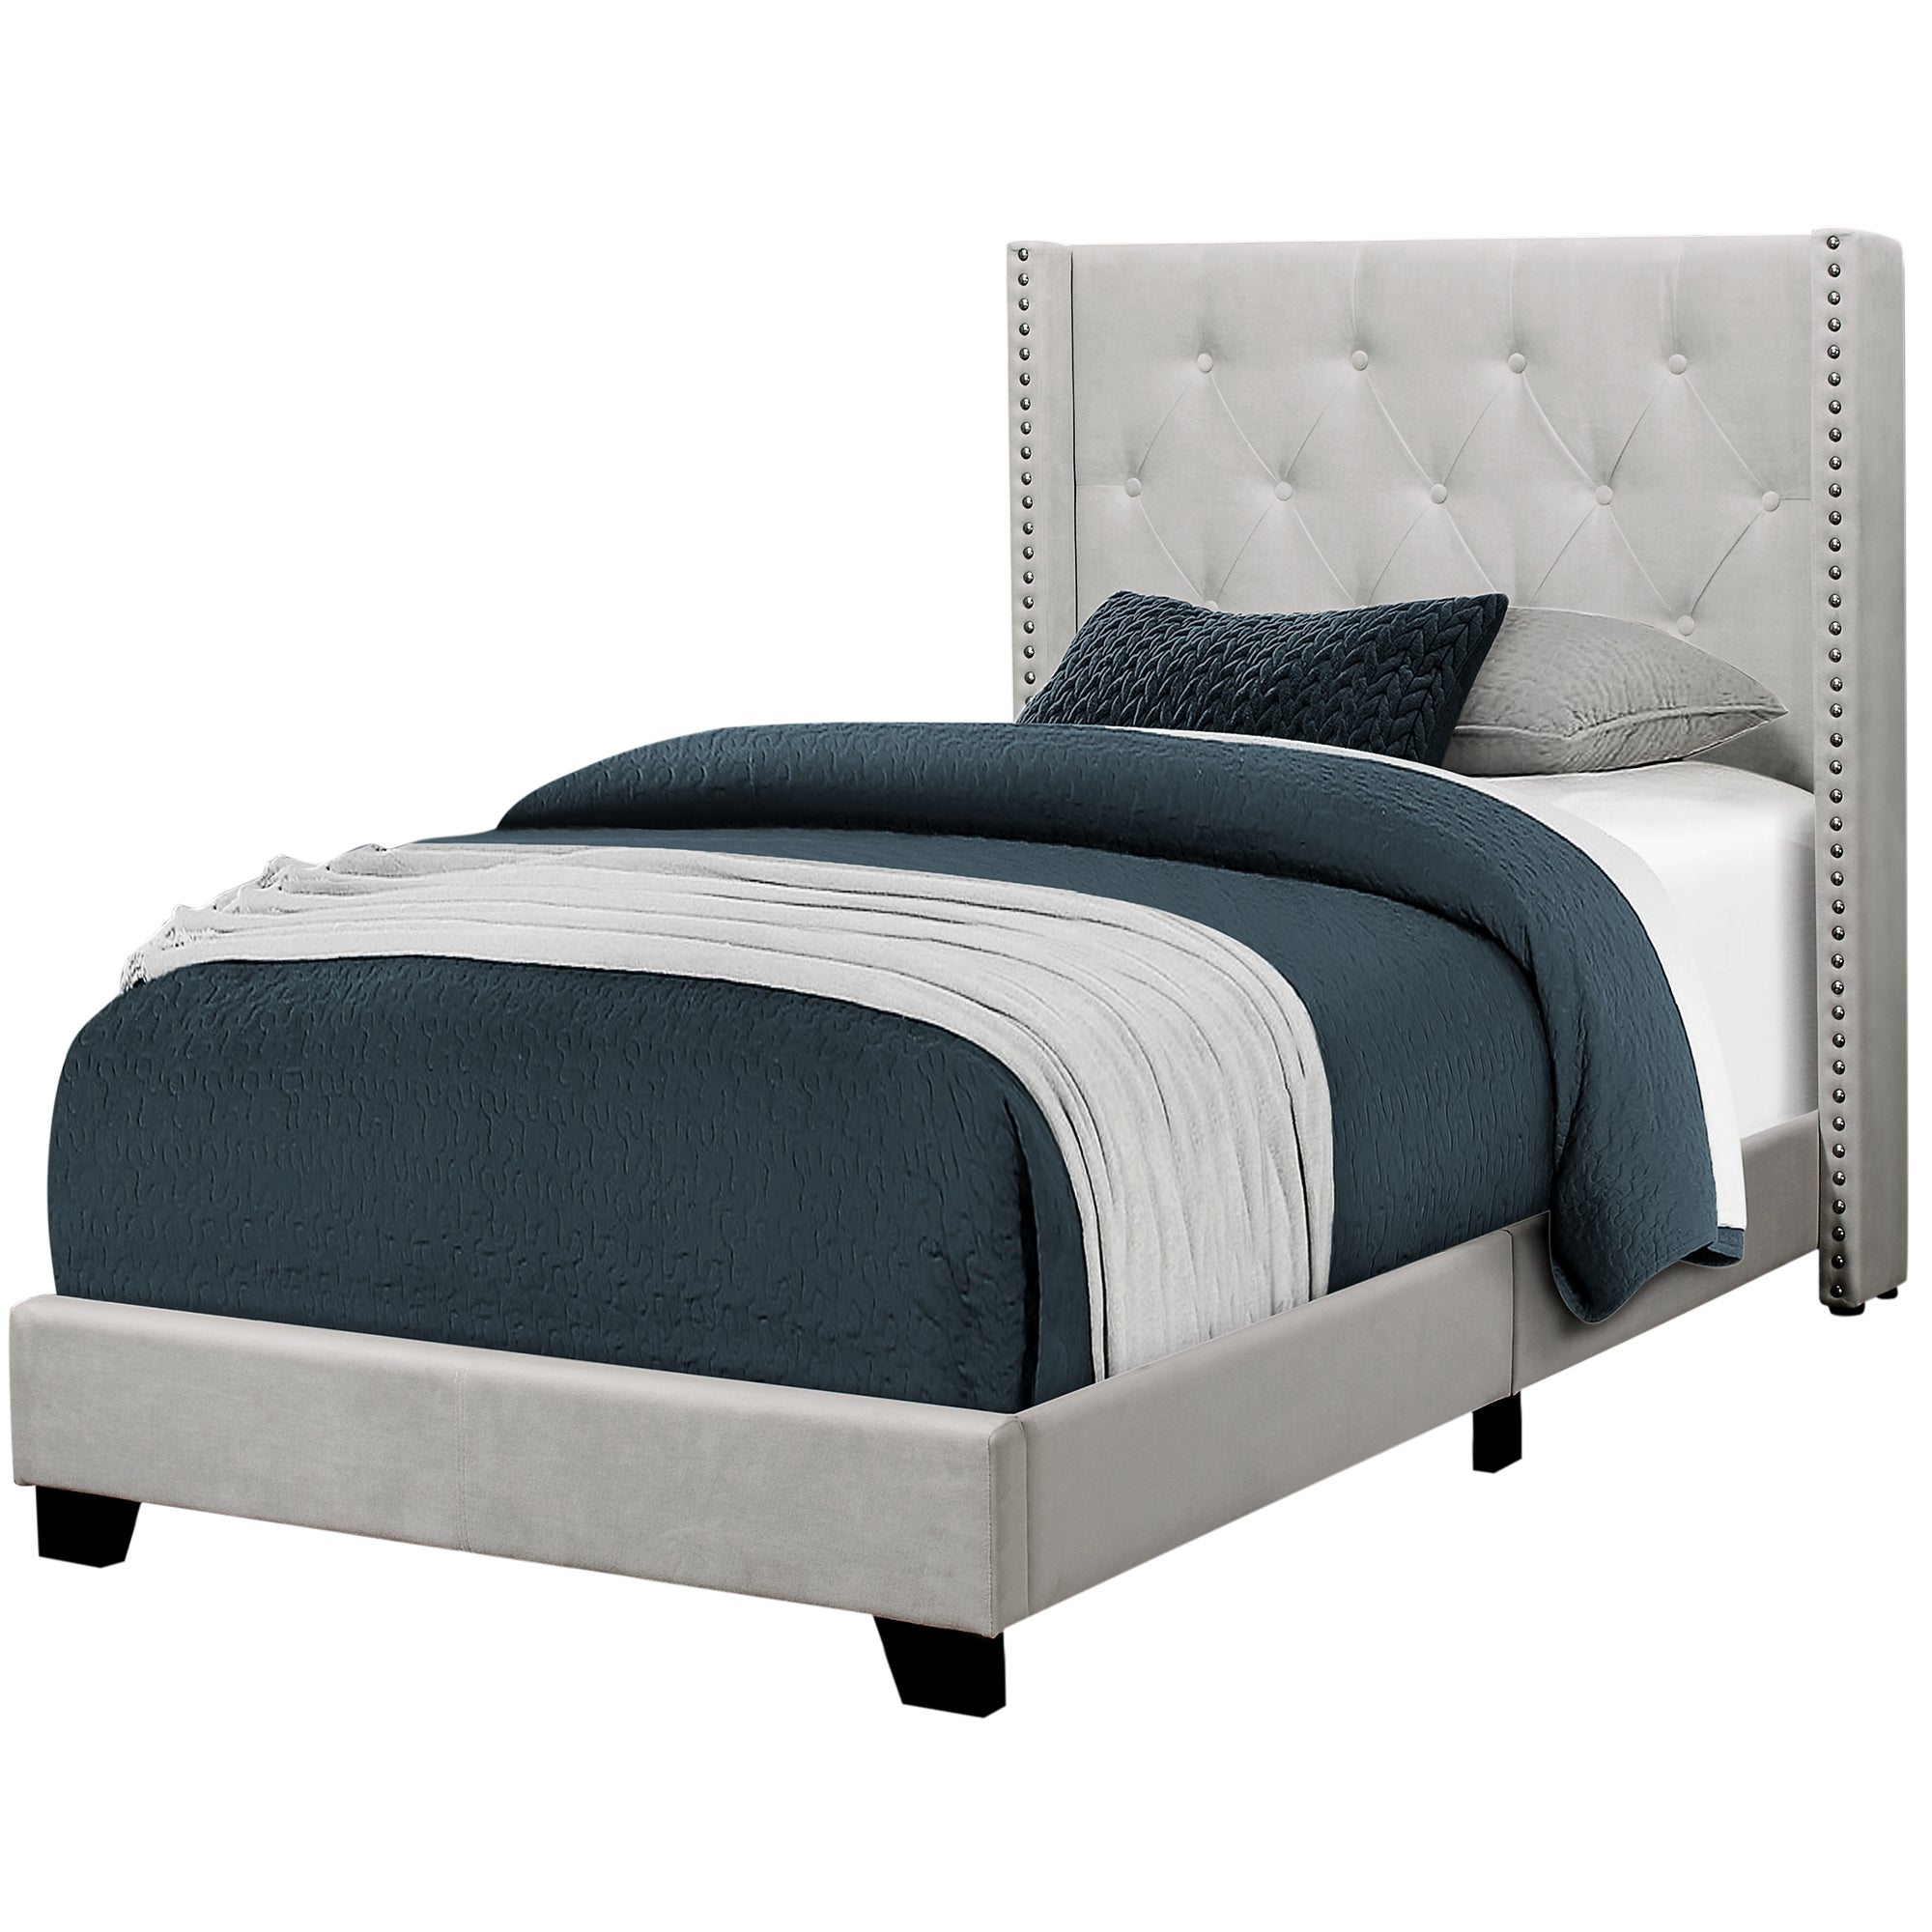 Bed - Twin Size / Light Grey Velvet With Chrome Trim